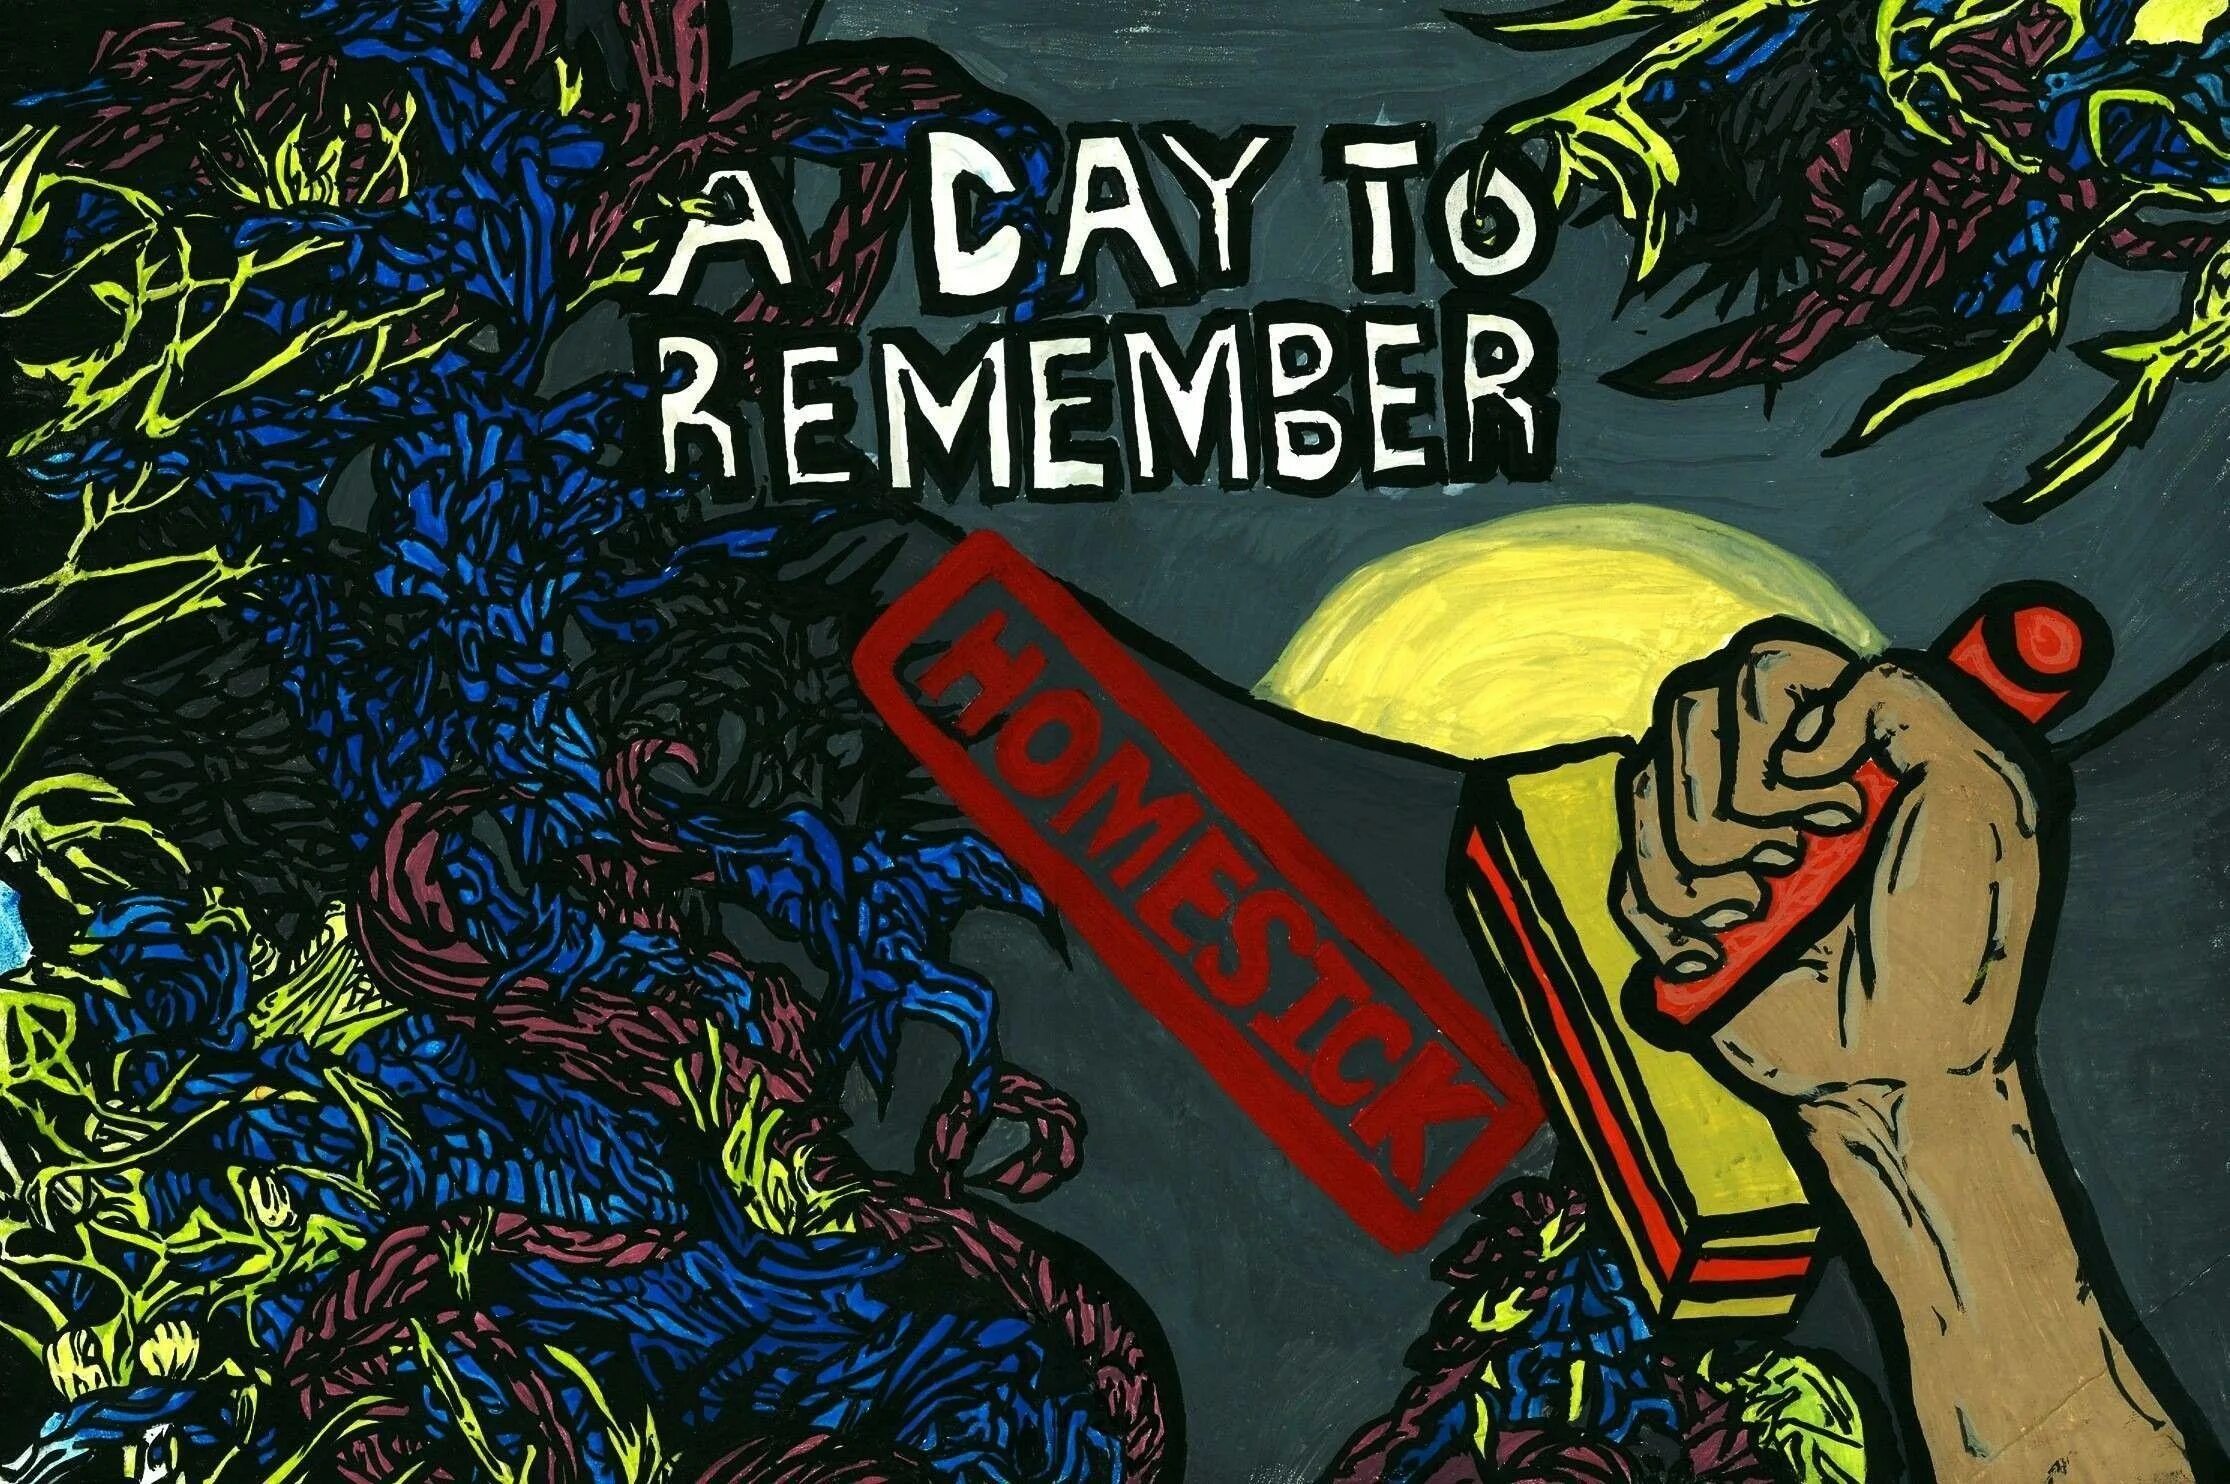 A Day to remember. A Day to remember логотип. Группа a Day to remember. A Day to remember обложка обои.